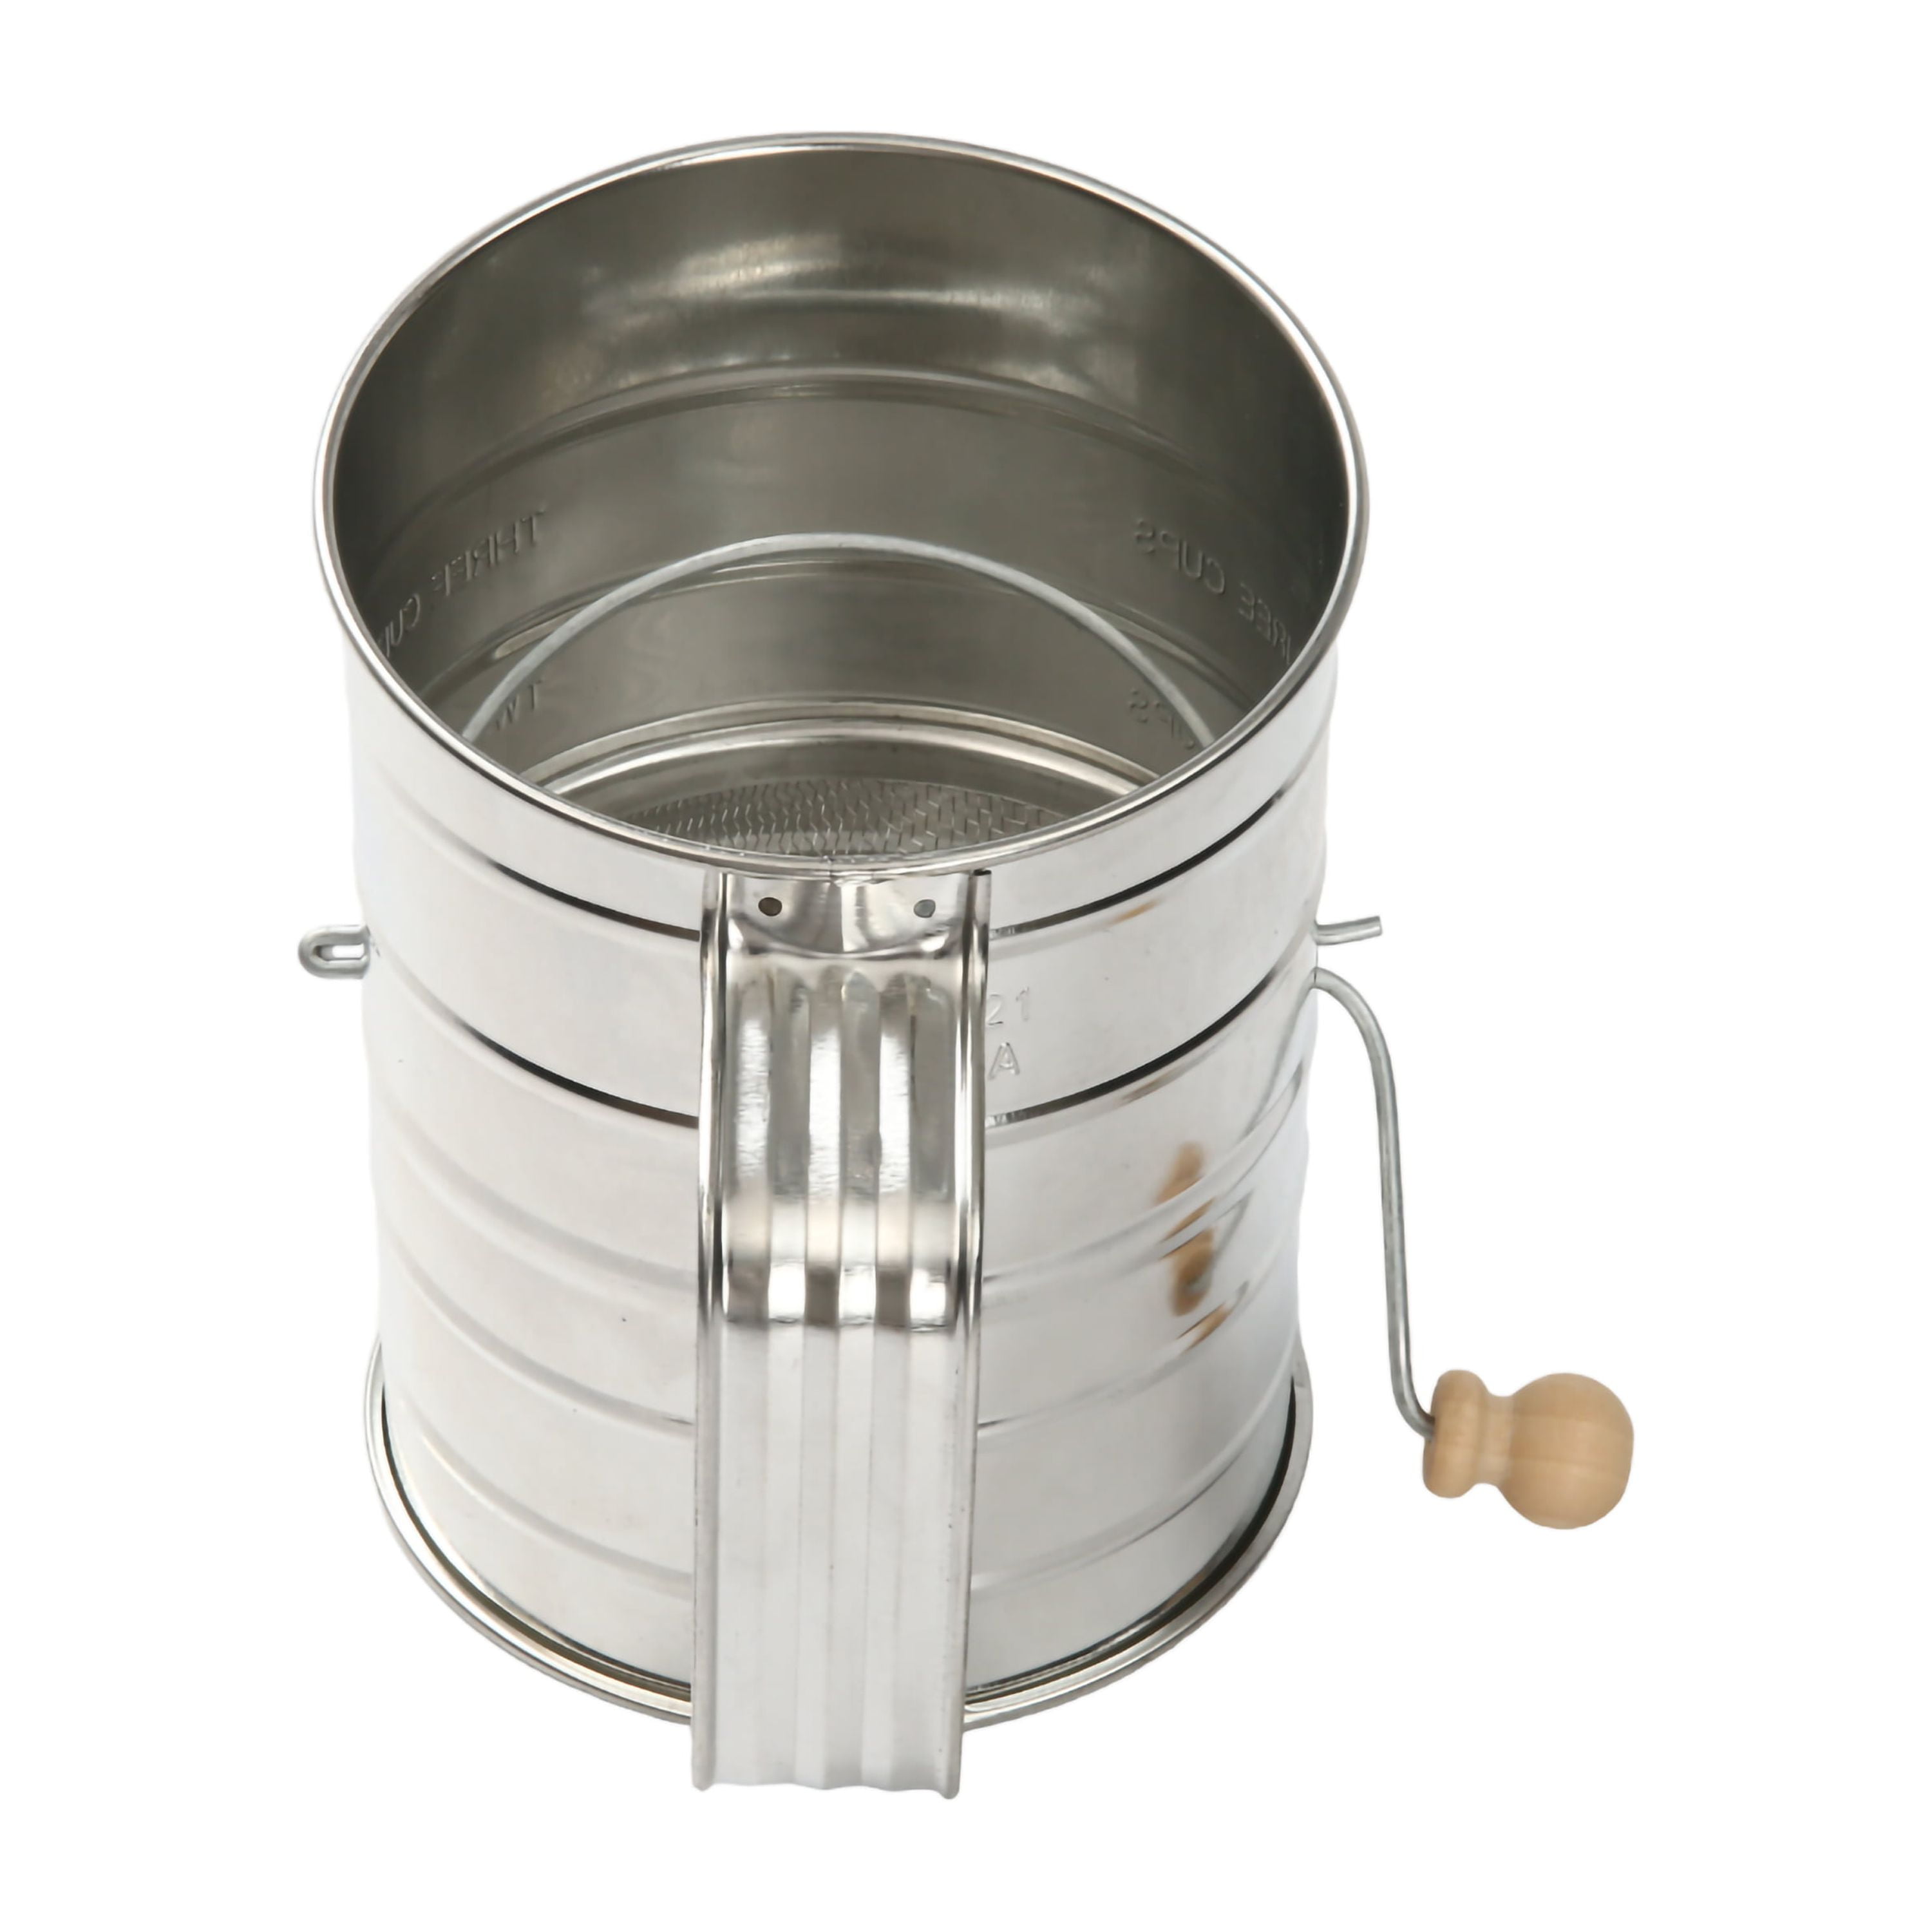 Oxo SoftWorks Stainless Steel Flour Sifter. 3.5 Cup Capacity. New. 